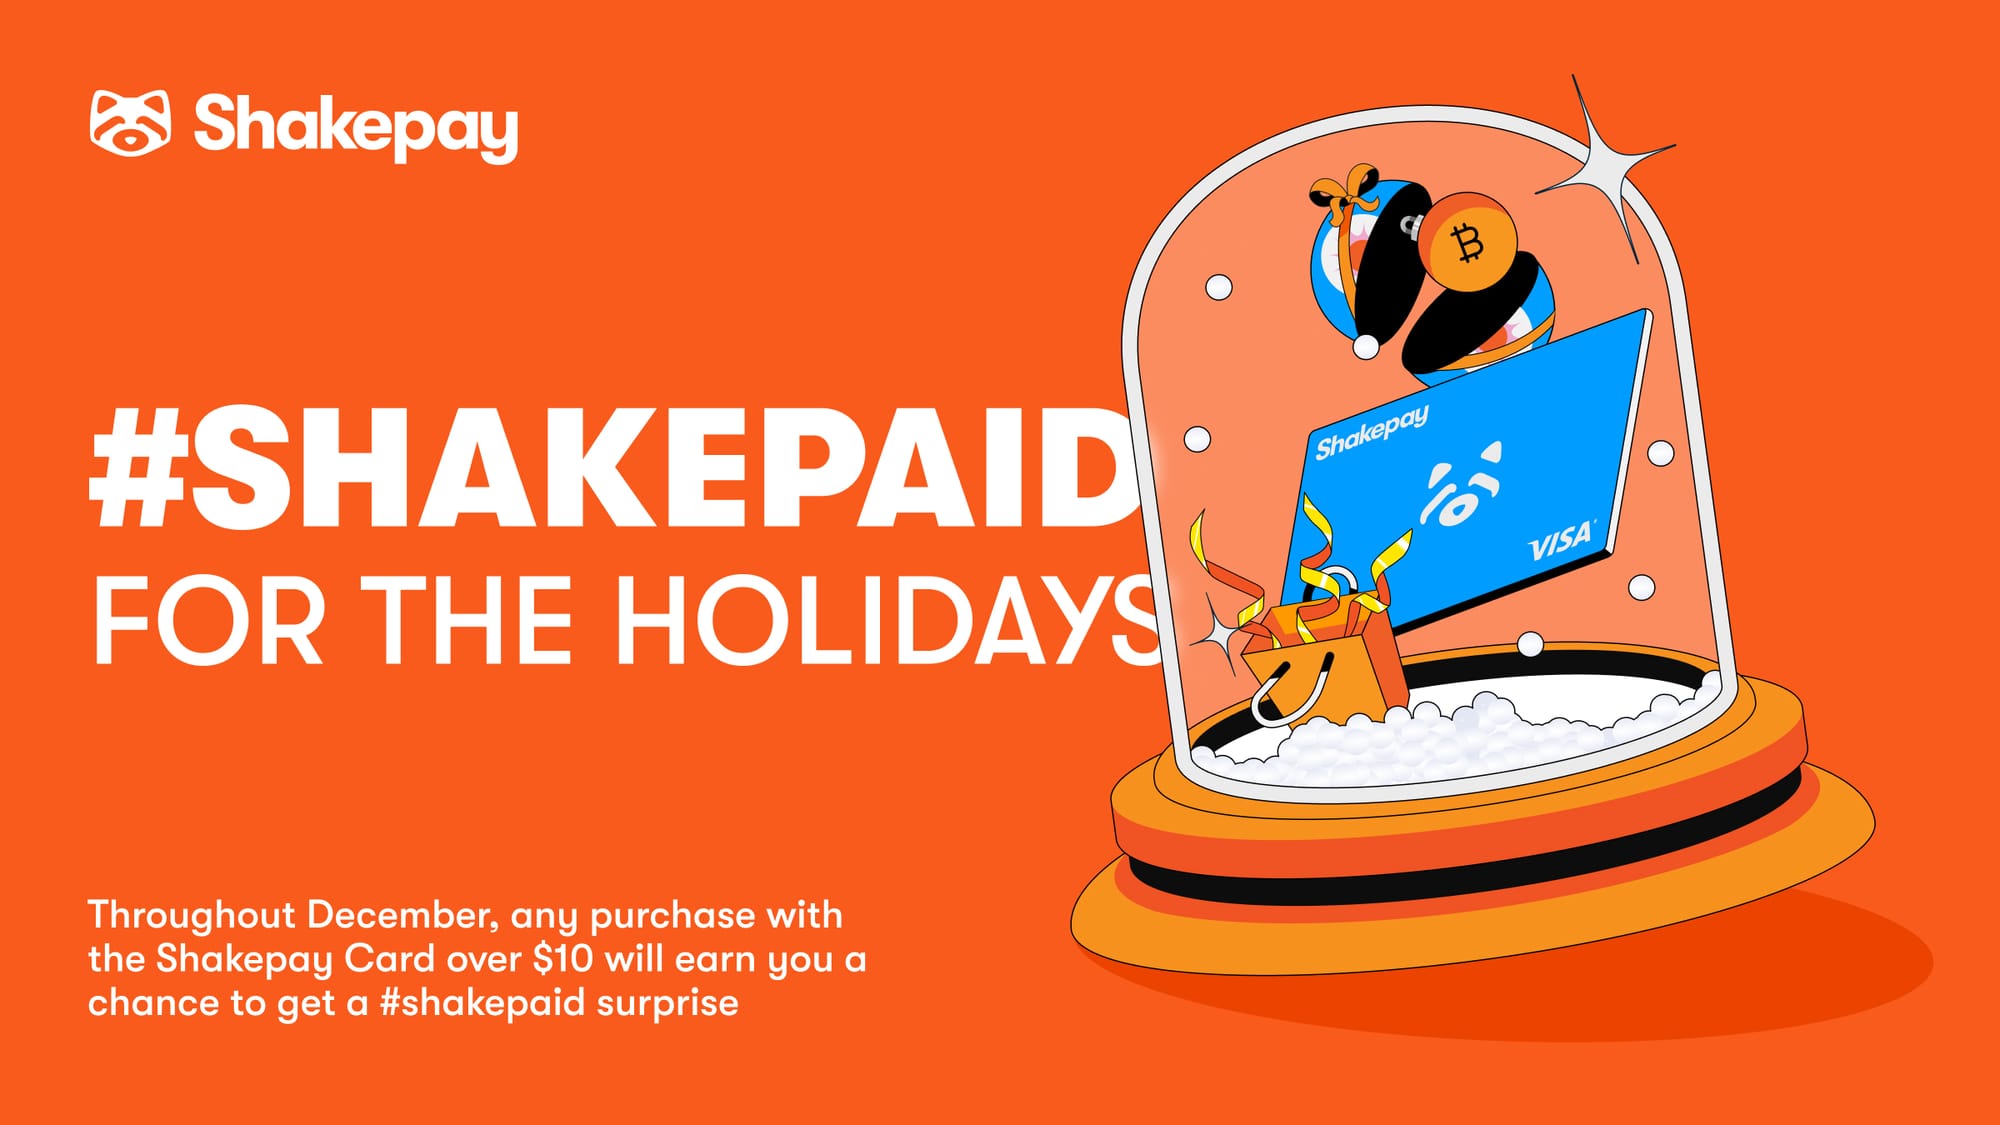 #Shakepaid for the holidays ❄️